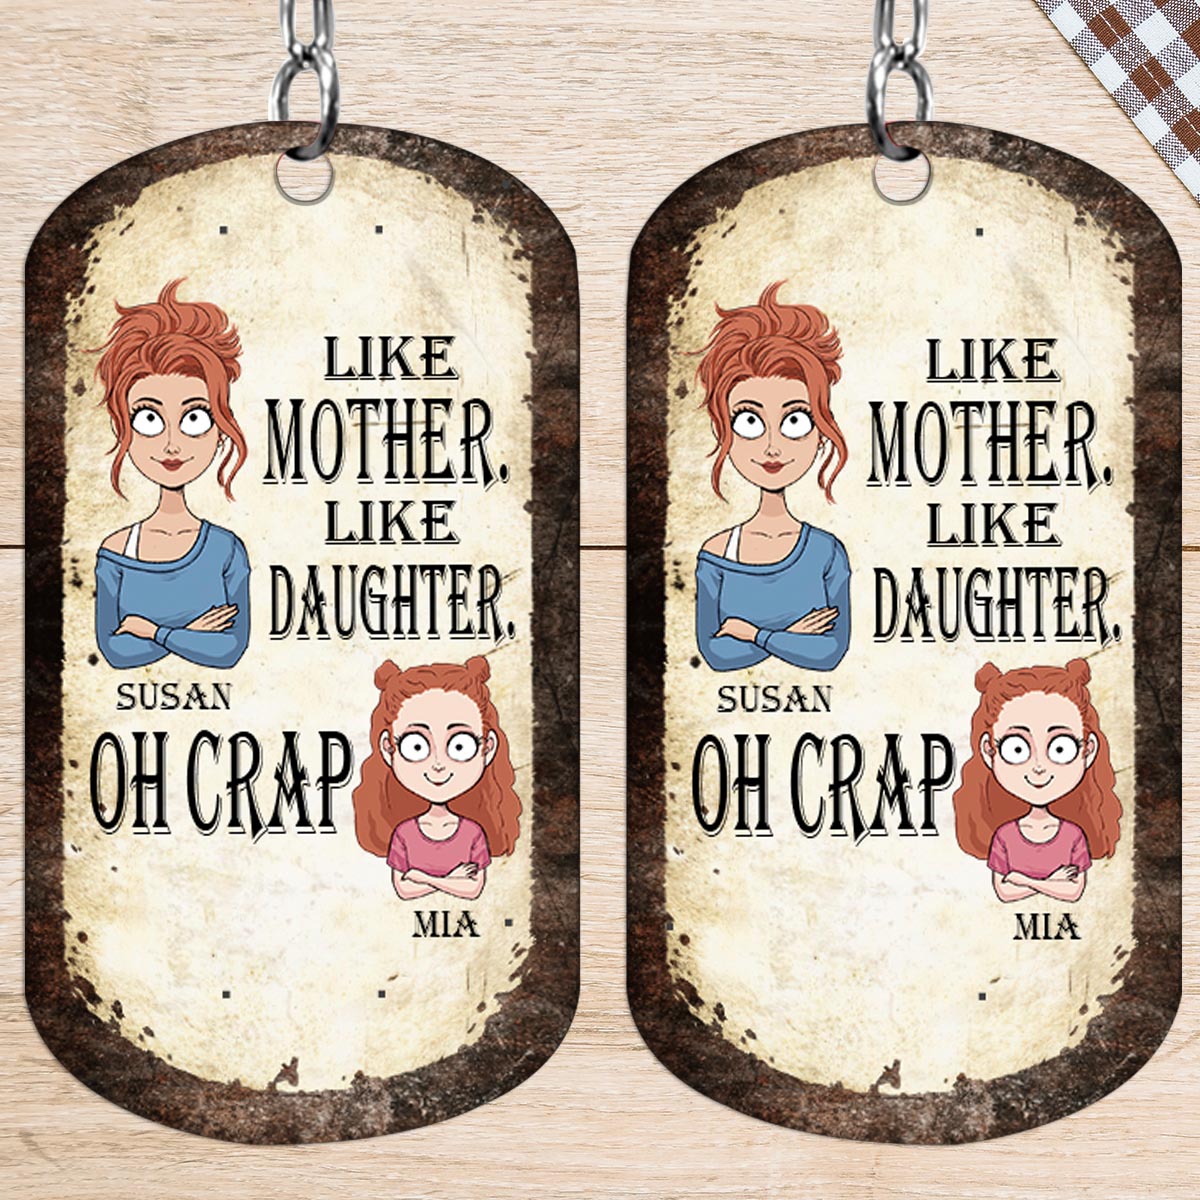 Discover Like Father Like Daughter Like Son - Gift for dad, mom, son, daughter - Personalized Stainless Steel Keychain